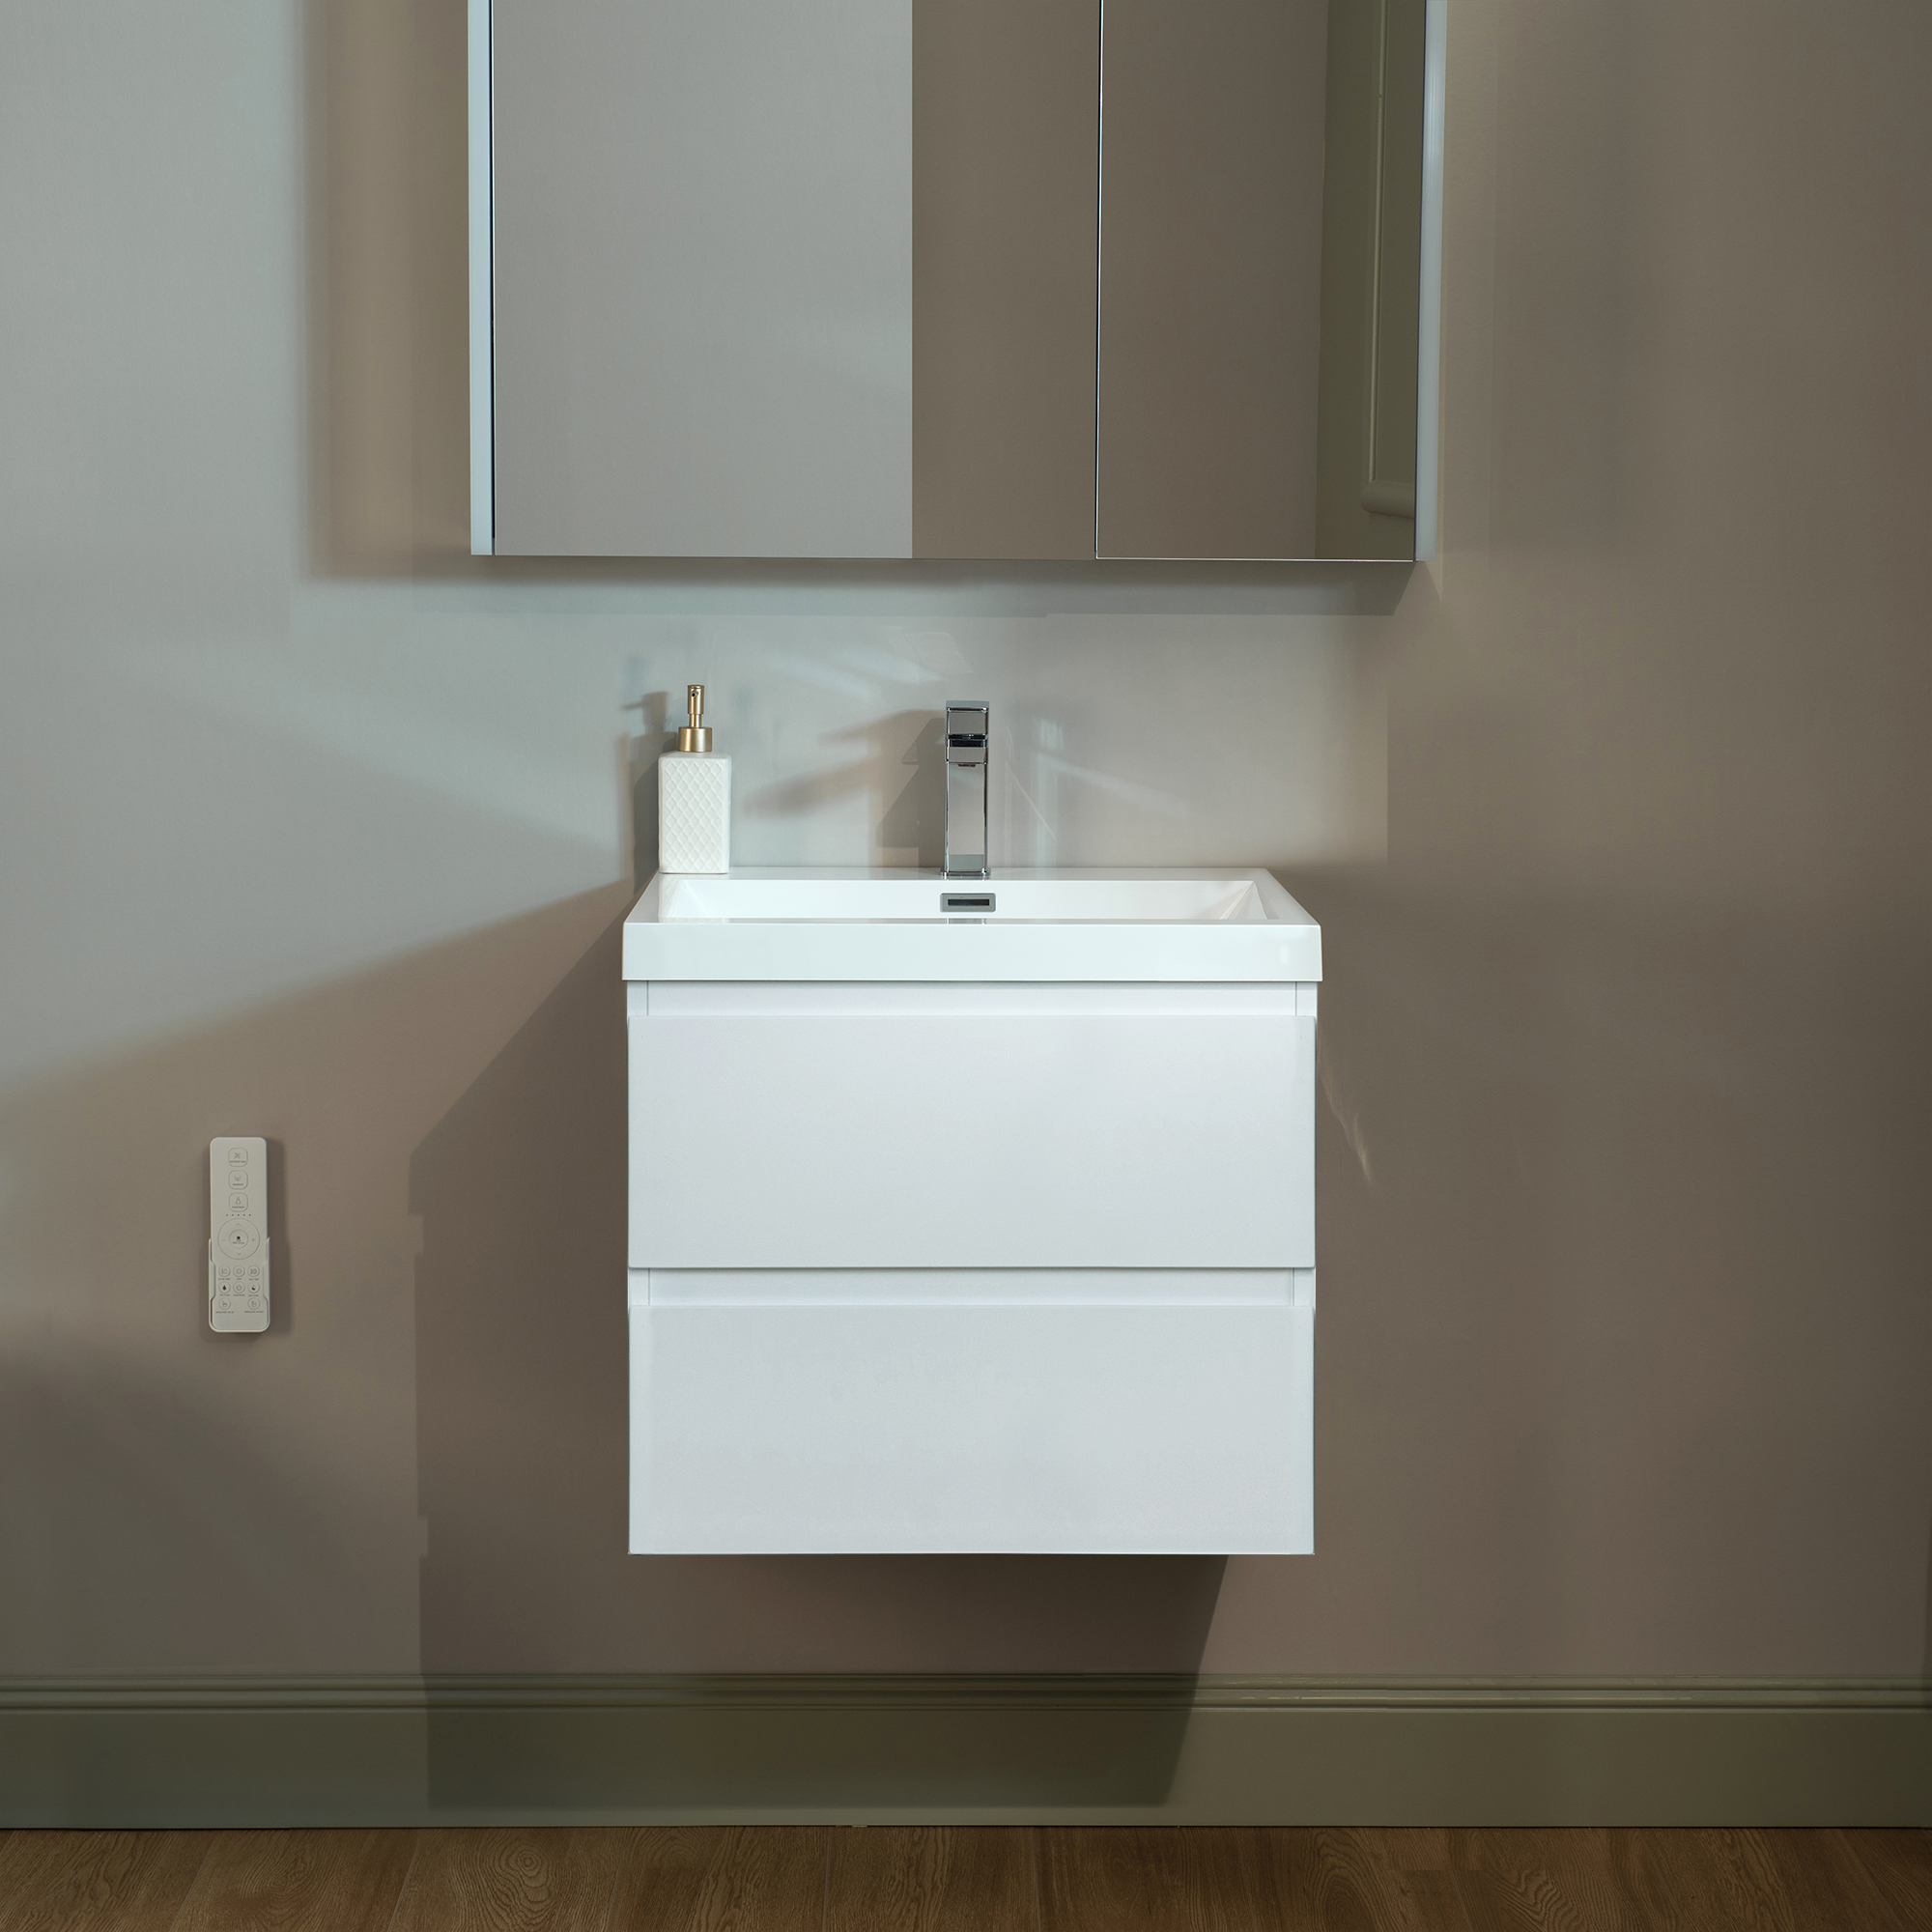 WOODBRIDGE 23-5/8 in. W x 19-5/8 in. D Wall Mounted Floating Vanity in Glossy White with Resin Composite Vanity Top in Glossy White